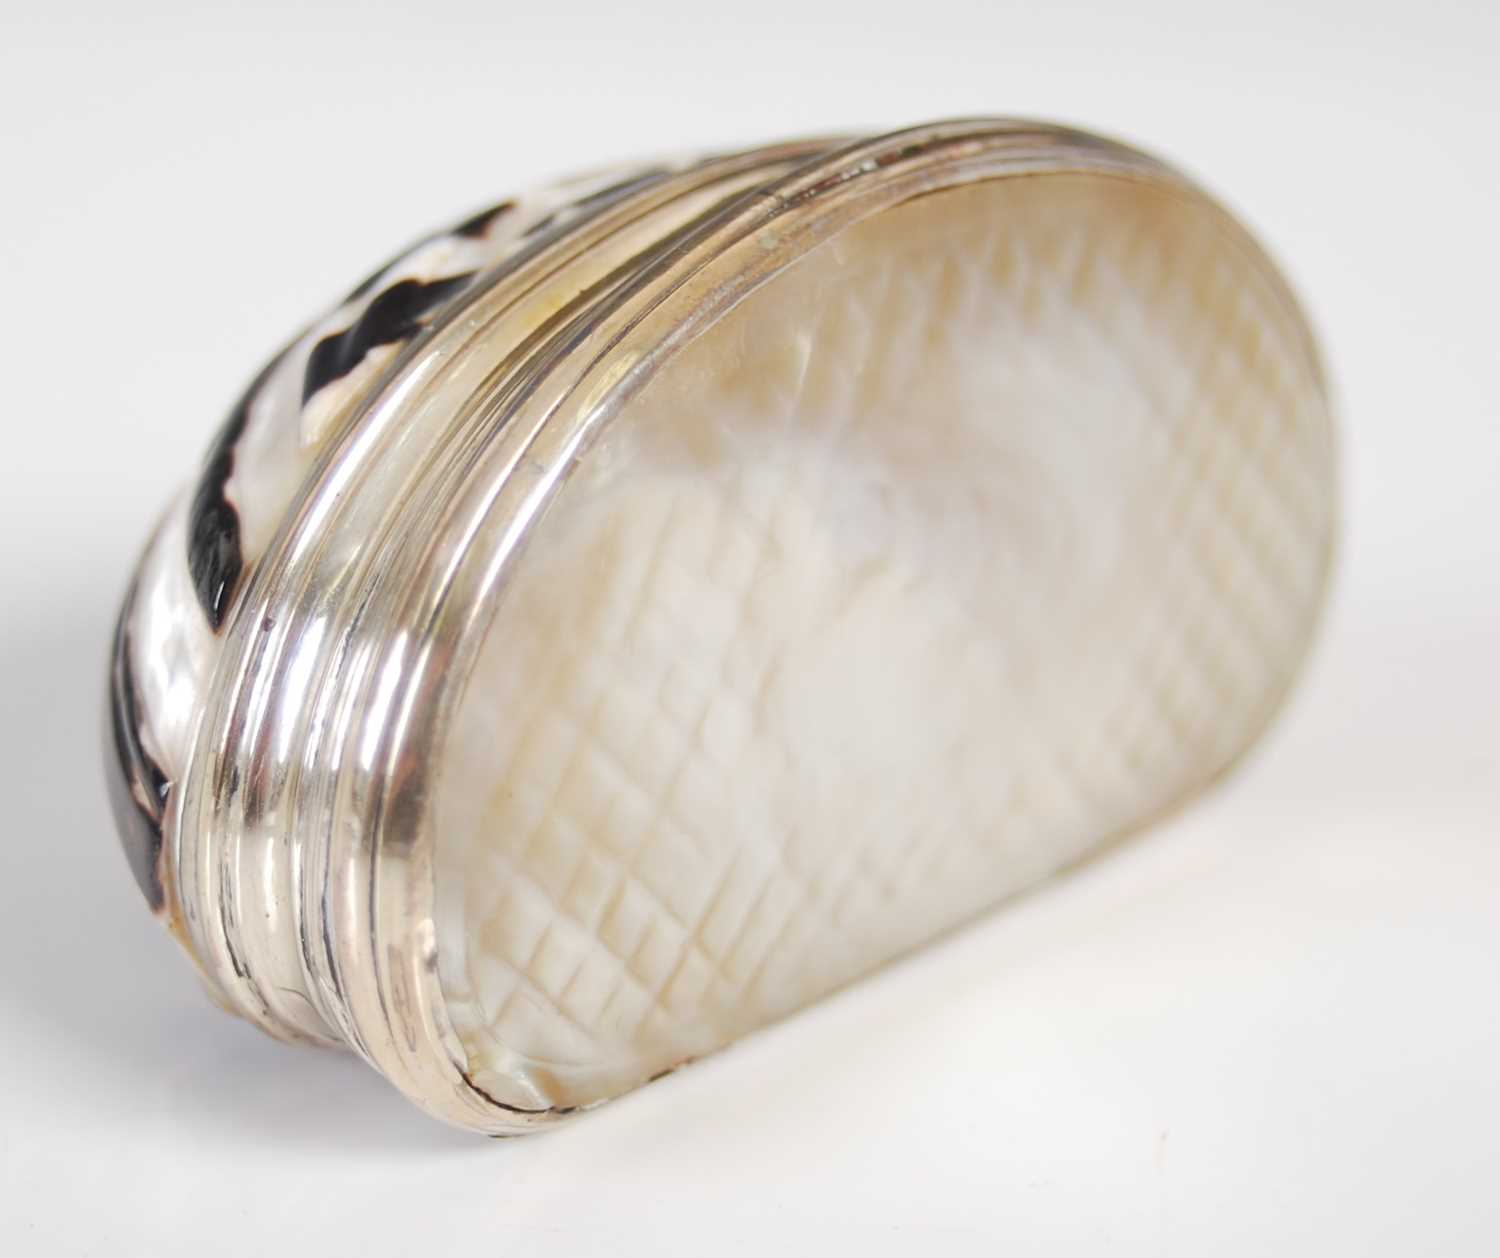 A Cittarium Pica ‘magpie’ shell snuff box, carved to produce a decorative design, with reeded silver - Image 2 of 3